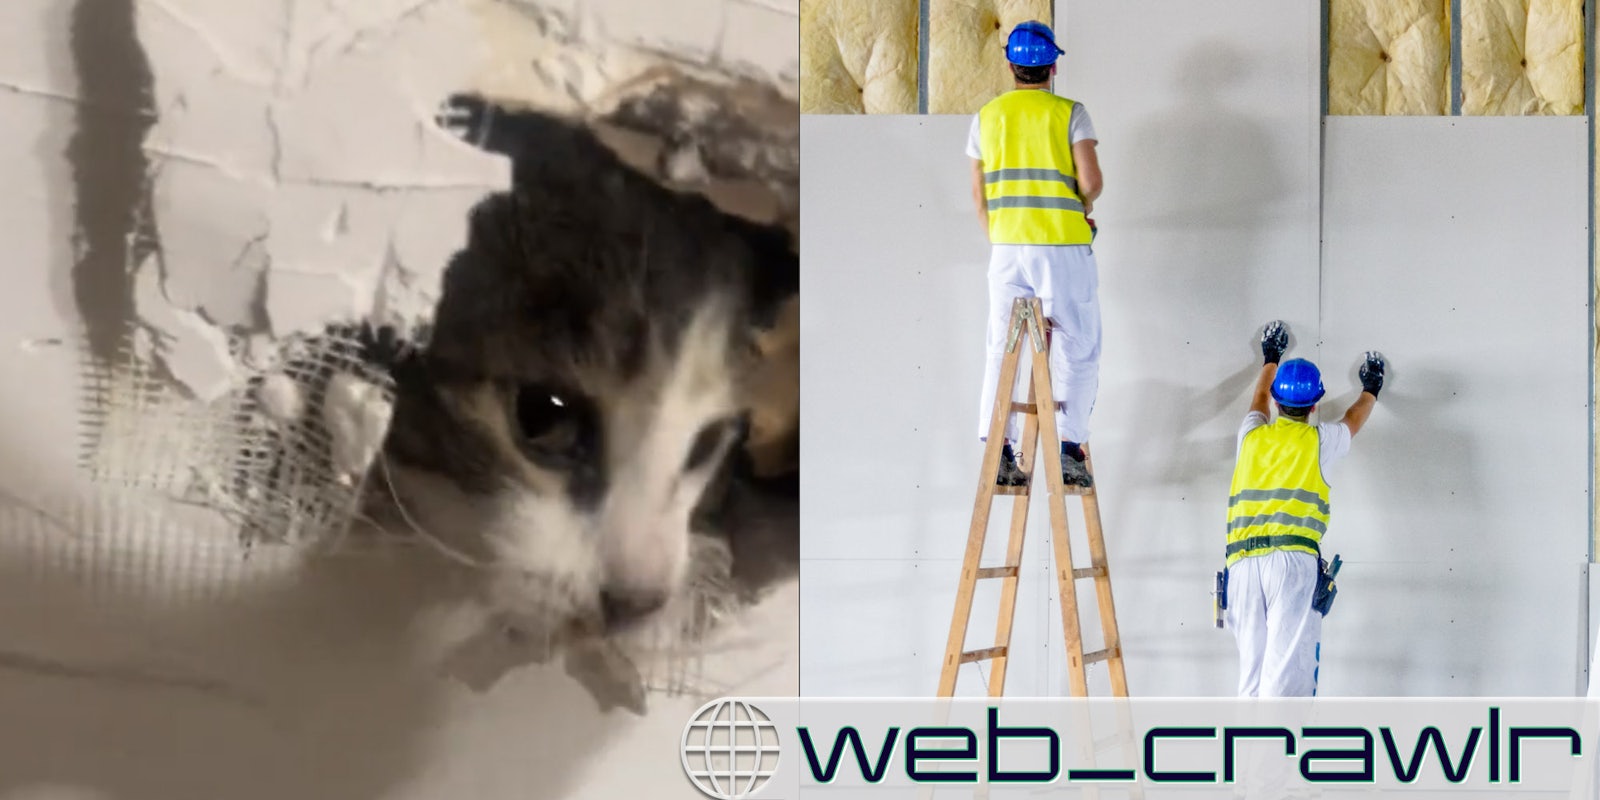 A cat poking his head through drywall. On the opposite side are workers putting up drywall. The Daily Dot newsletter web_crawlr logo is in the bottom right corner.